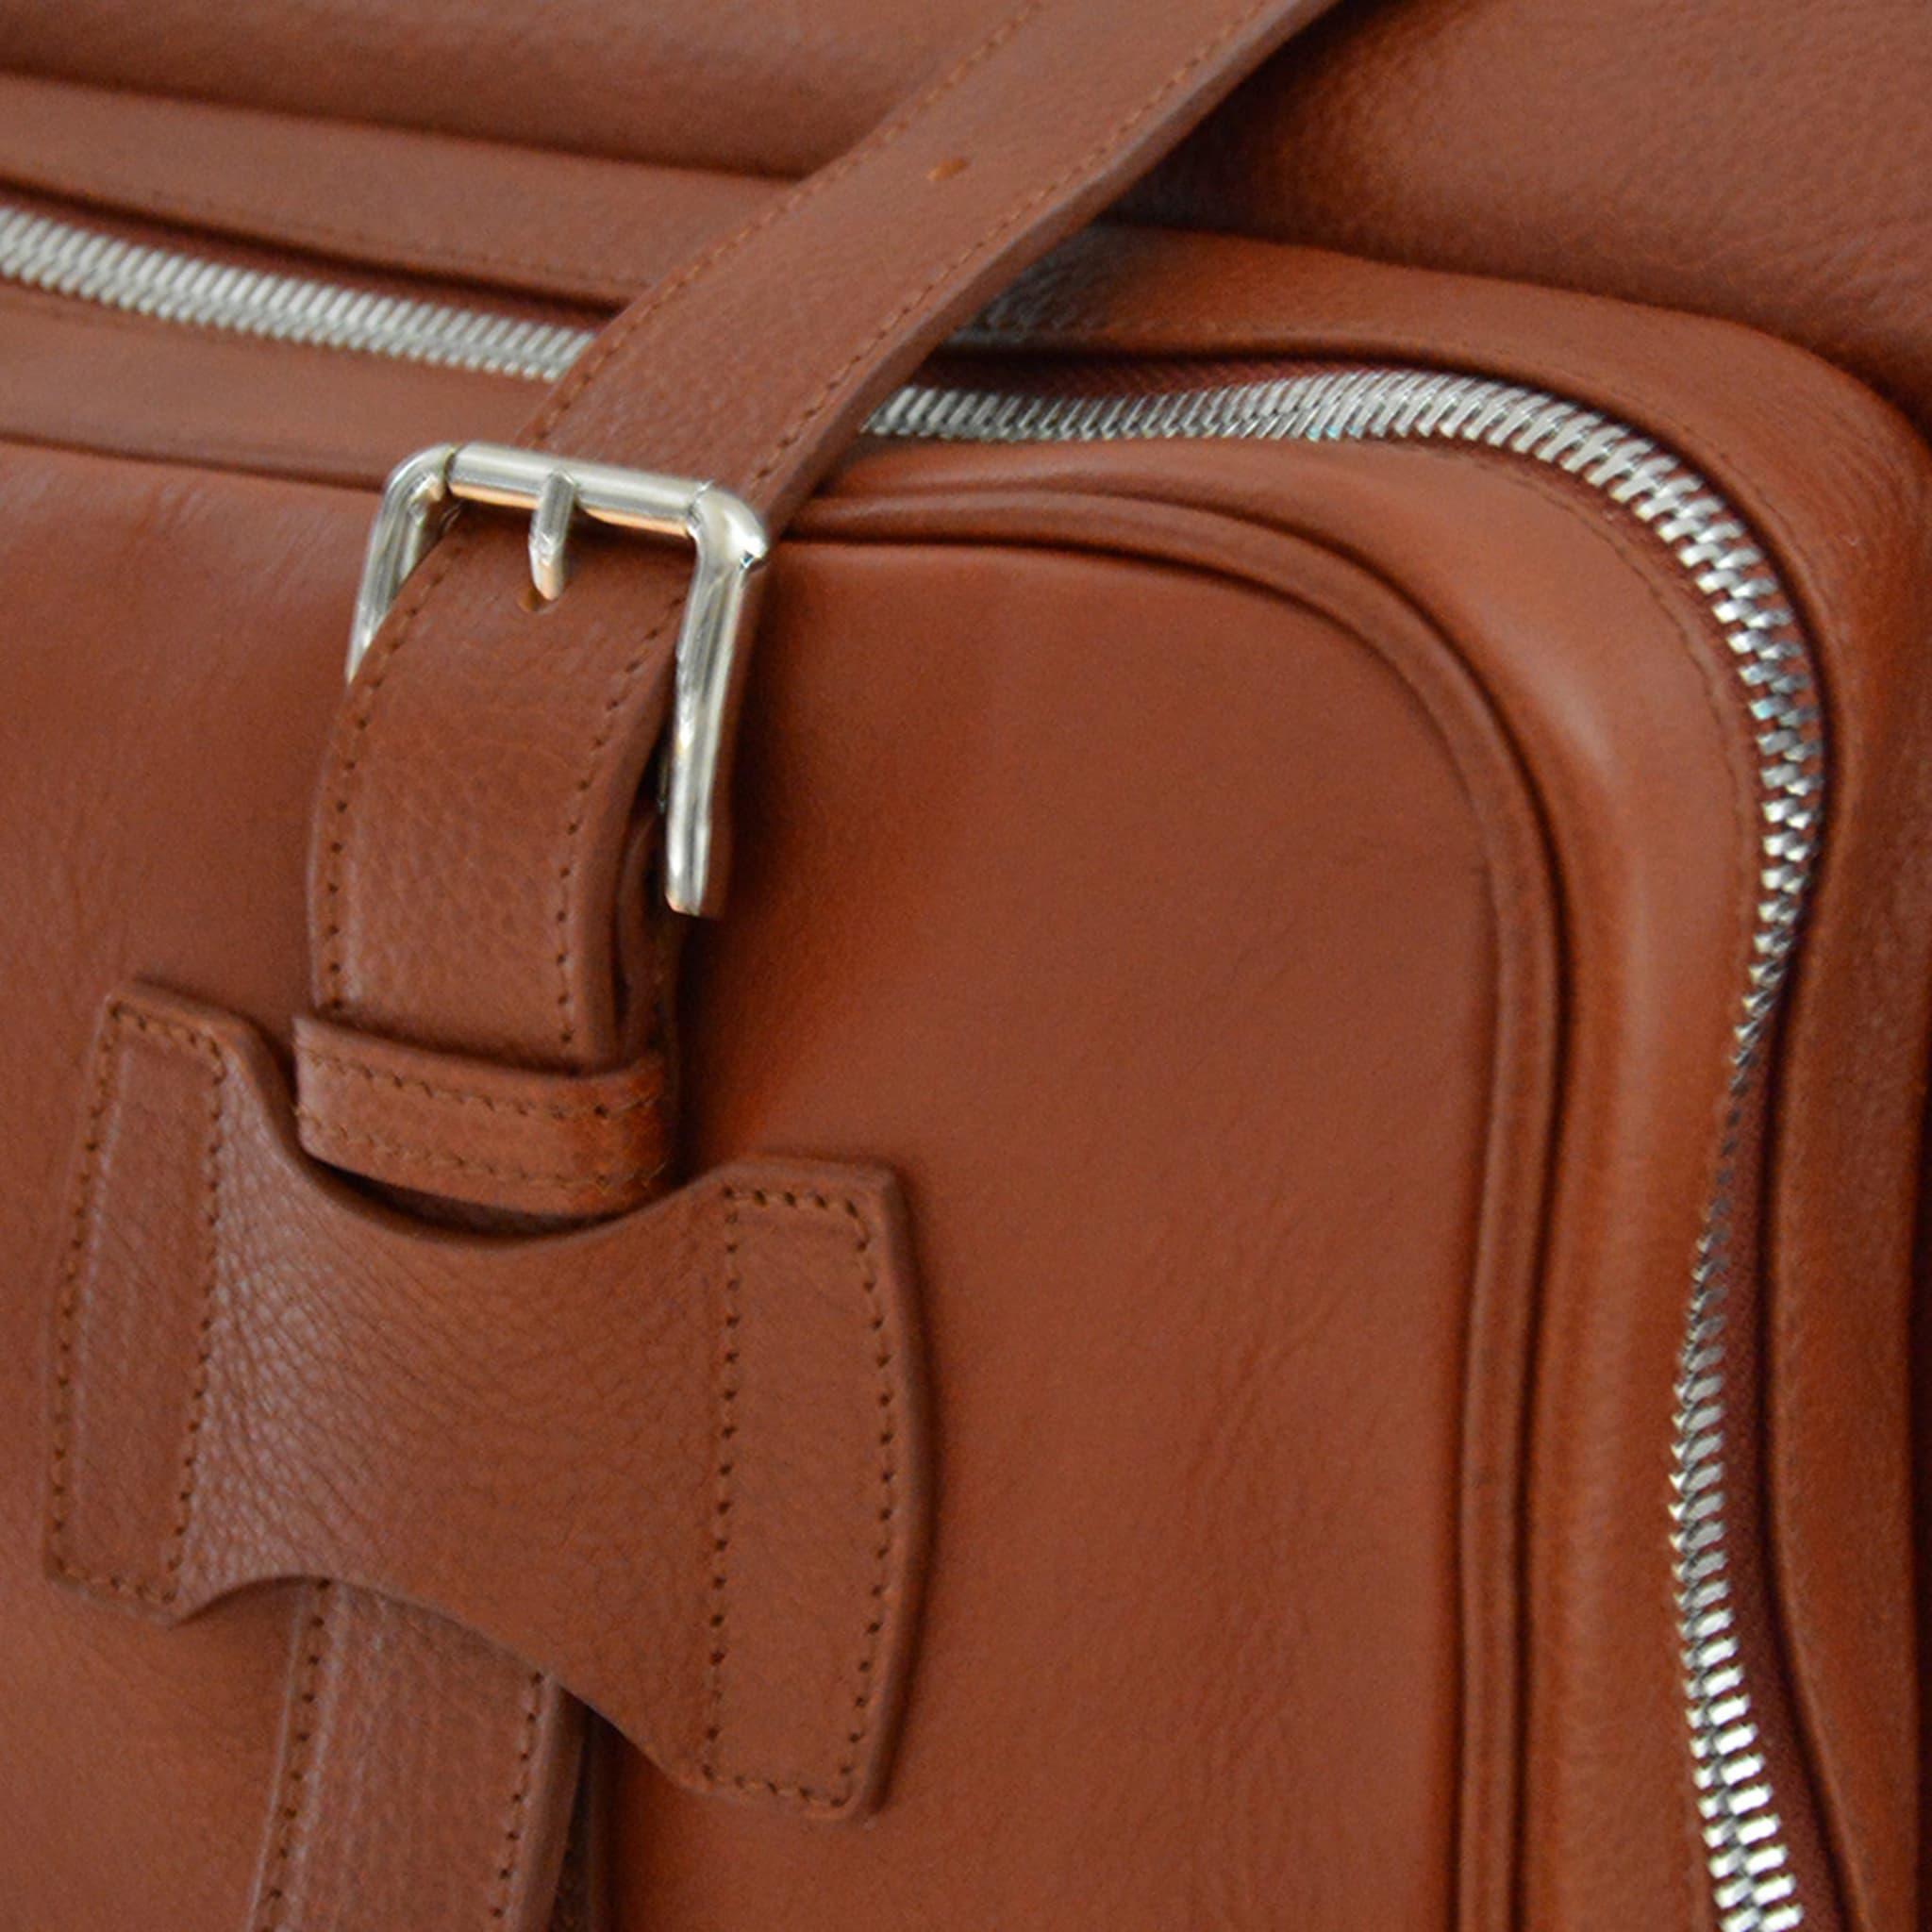 Luxuriously crafted in quality vegetable tanned leather, this splendid bag contains internal pockets, plus one external front pocket and two side pockets. An optional and adjustable shoulder strap, provide further functionality to this elegant brown